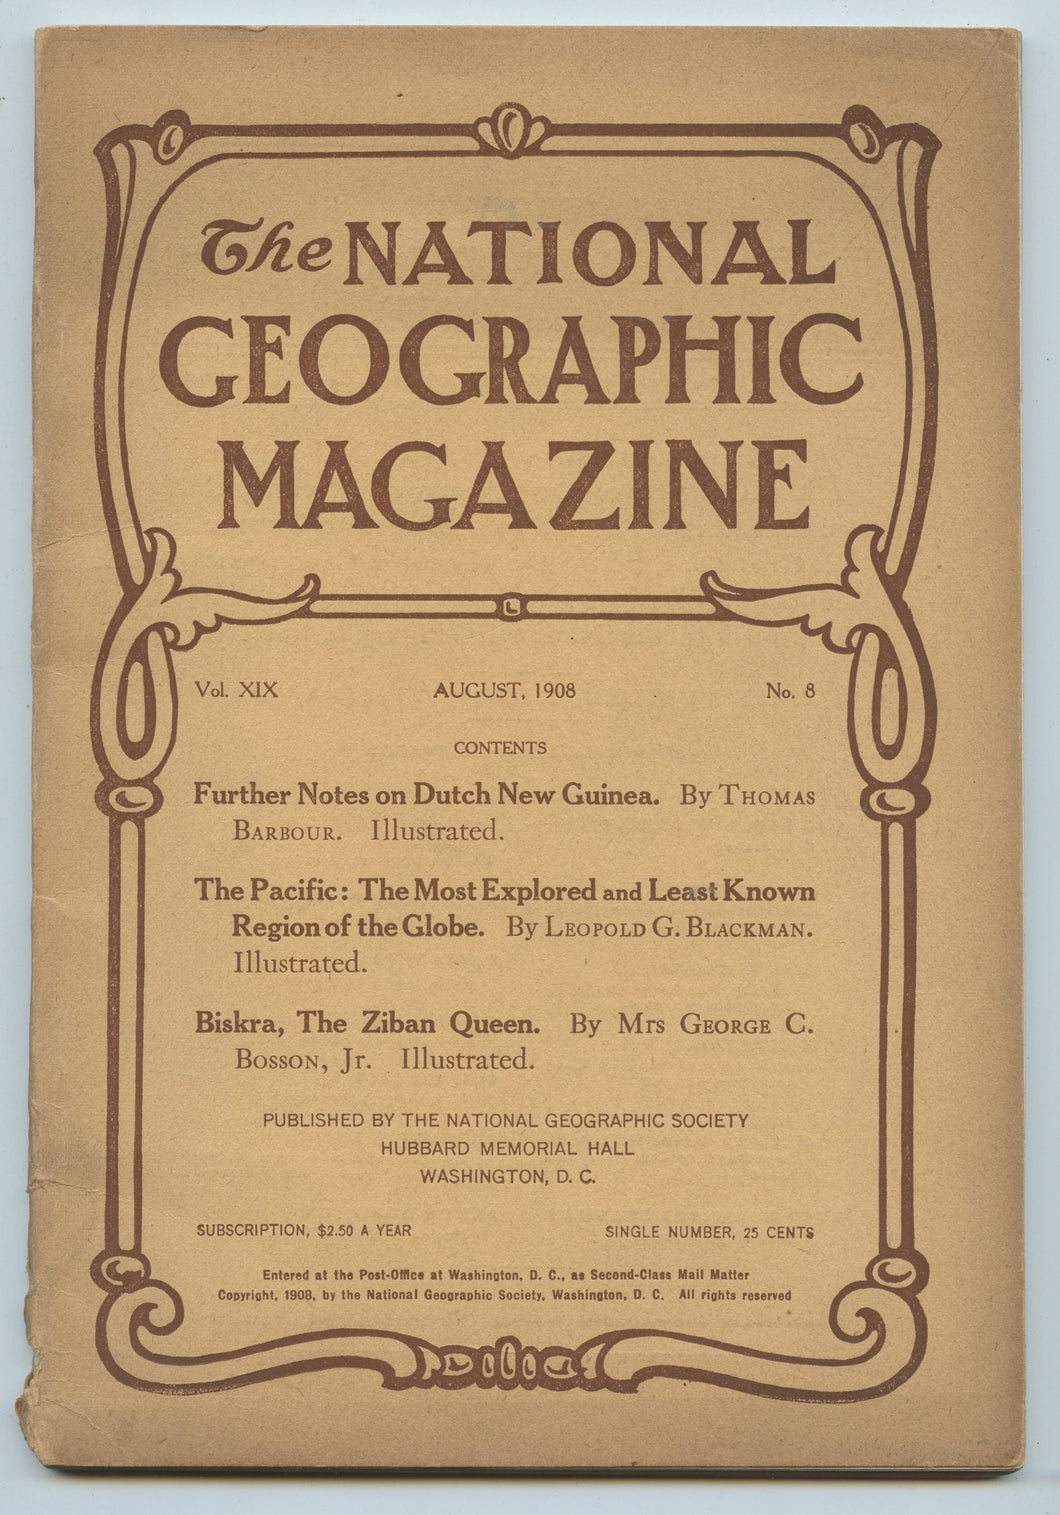 The National Geographic Magazine, August 1908